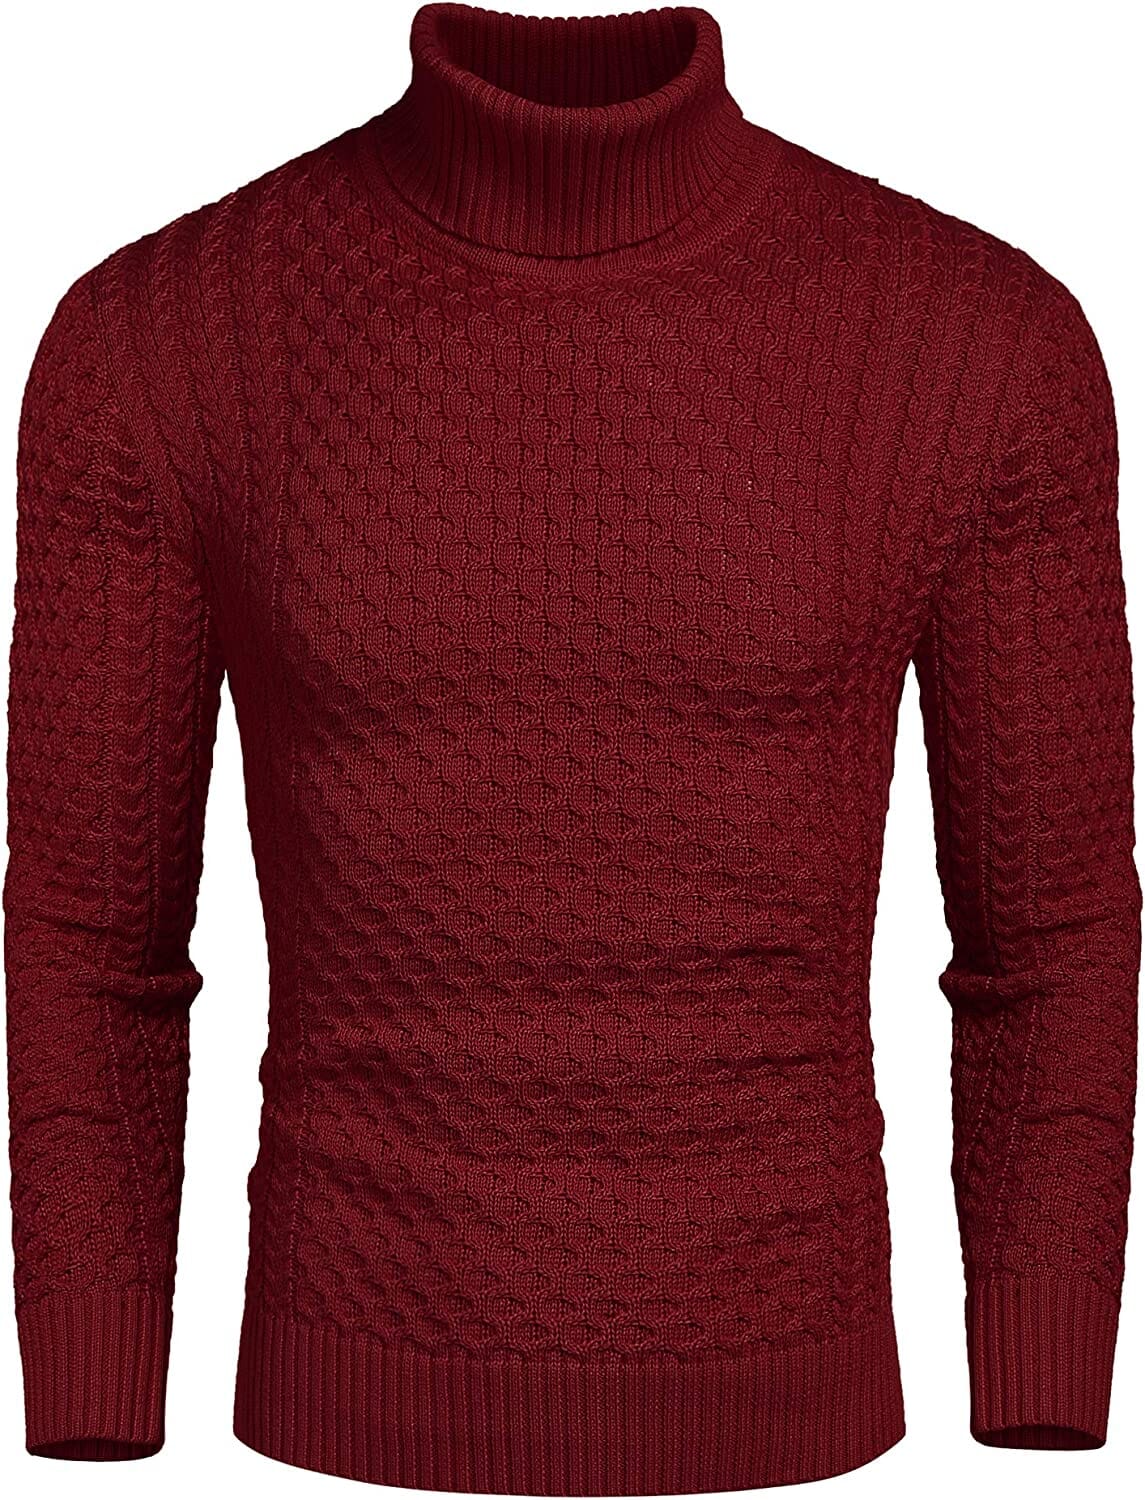 Slim Fit Turtleneck Twisted Sweater (US Only) Sweaters Coofandy's Wine Red S 